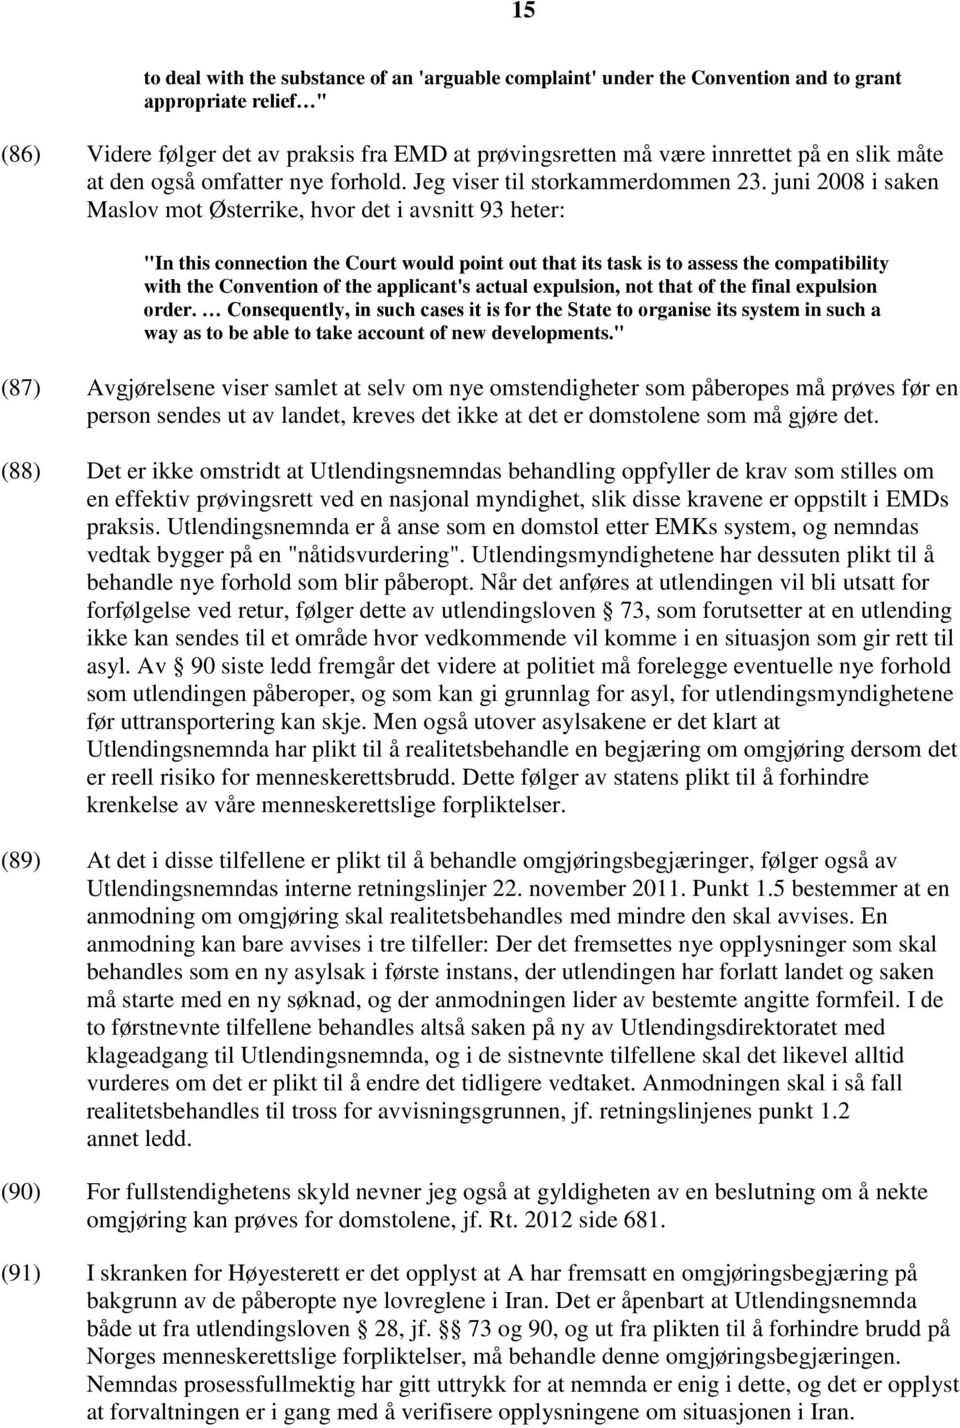 juni 2008 i saken Maslov mot Østerrike, hvor det i avsnitt 93 heter: "In this connection the Court would point out that its task is to assess the compatibility with the Convention of the applicant's